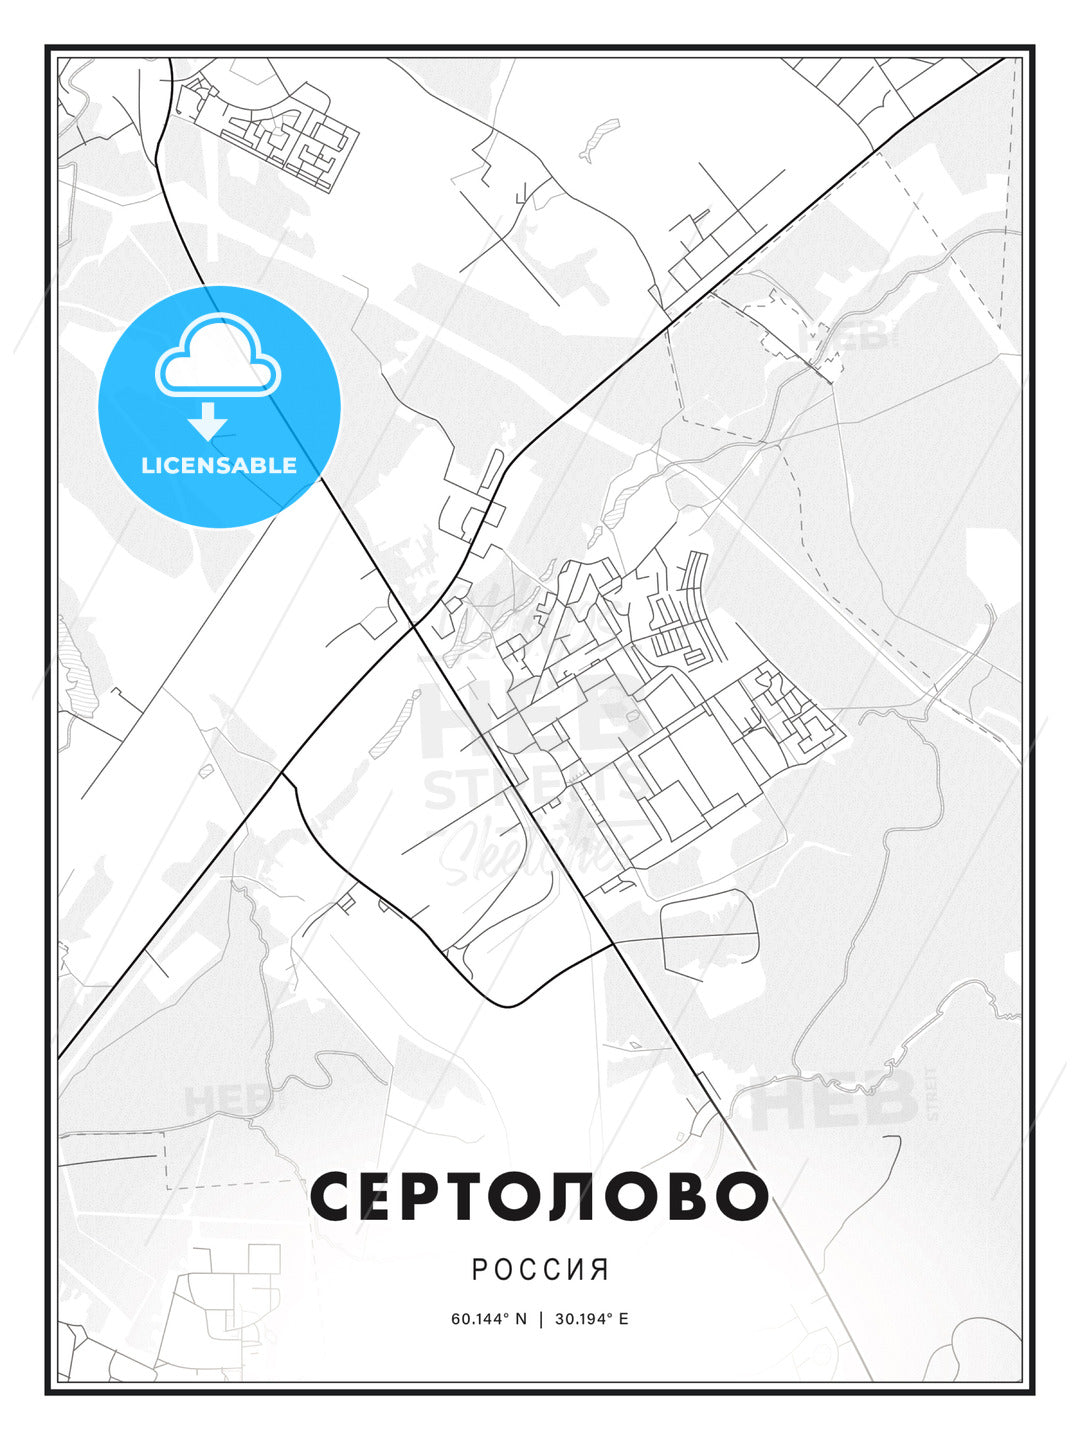 СЕРТОЛОВО / Sertolovo, Russia, Modern Print Template in Various Formats - HEBSTREITS Sketches